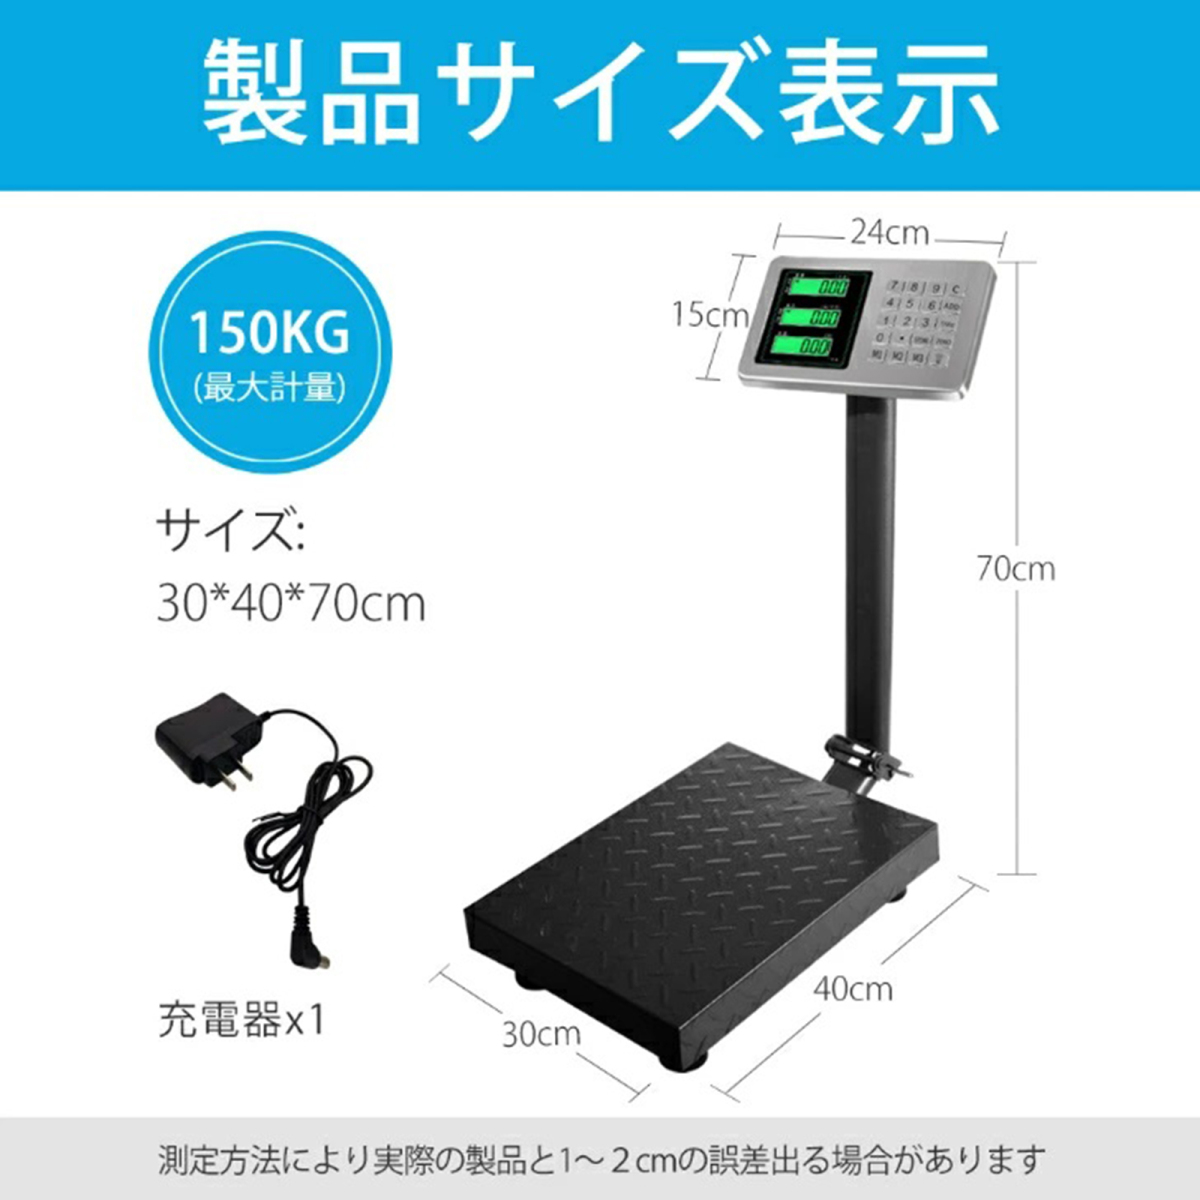  pcs measuring 150kg digital measuring battery built-in rechargeable folding type panel operation waterproof dustproof PL guarantee joining settled pcs scales scale high precision sensor high capacity battery length hour 